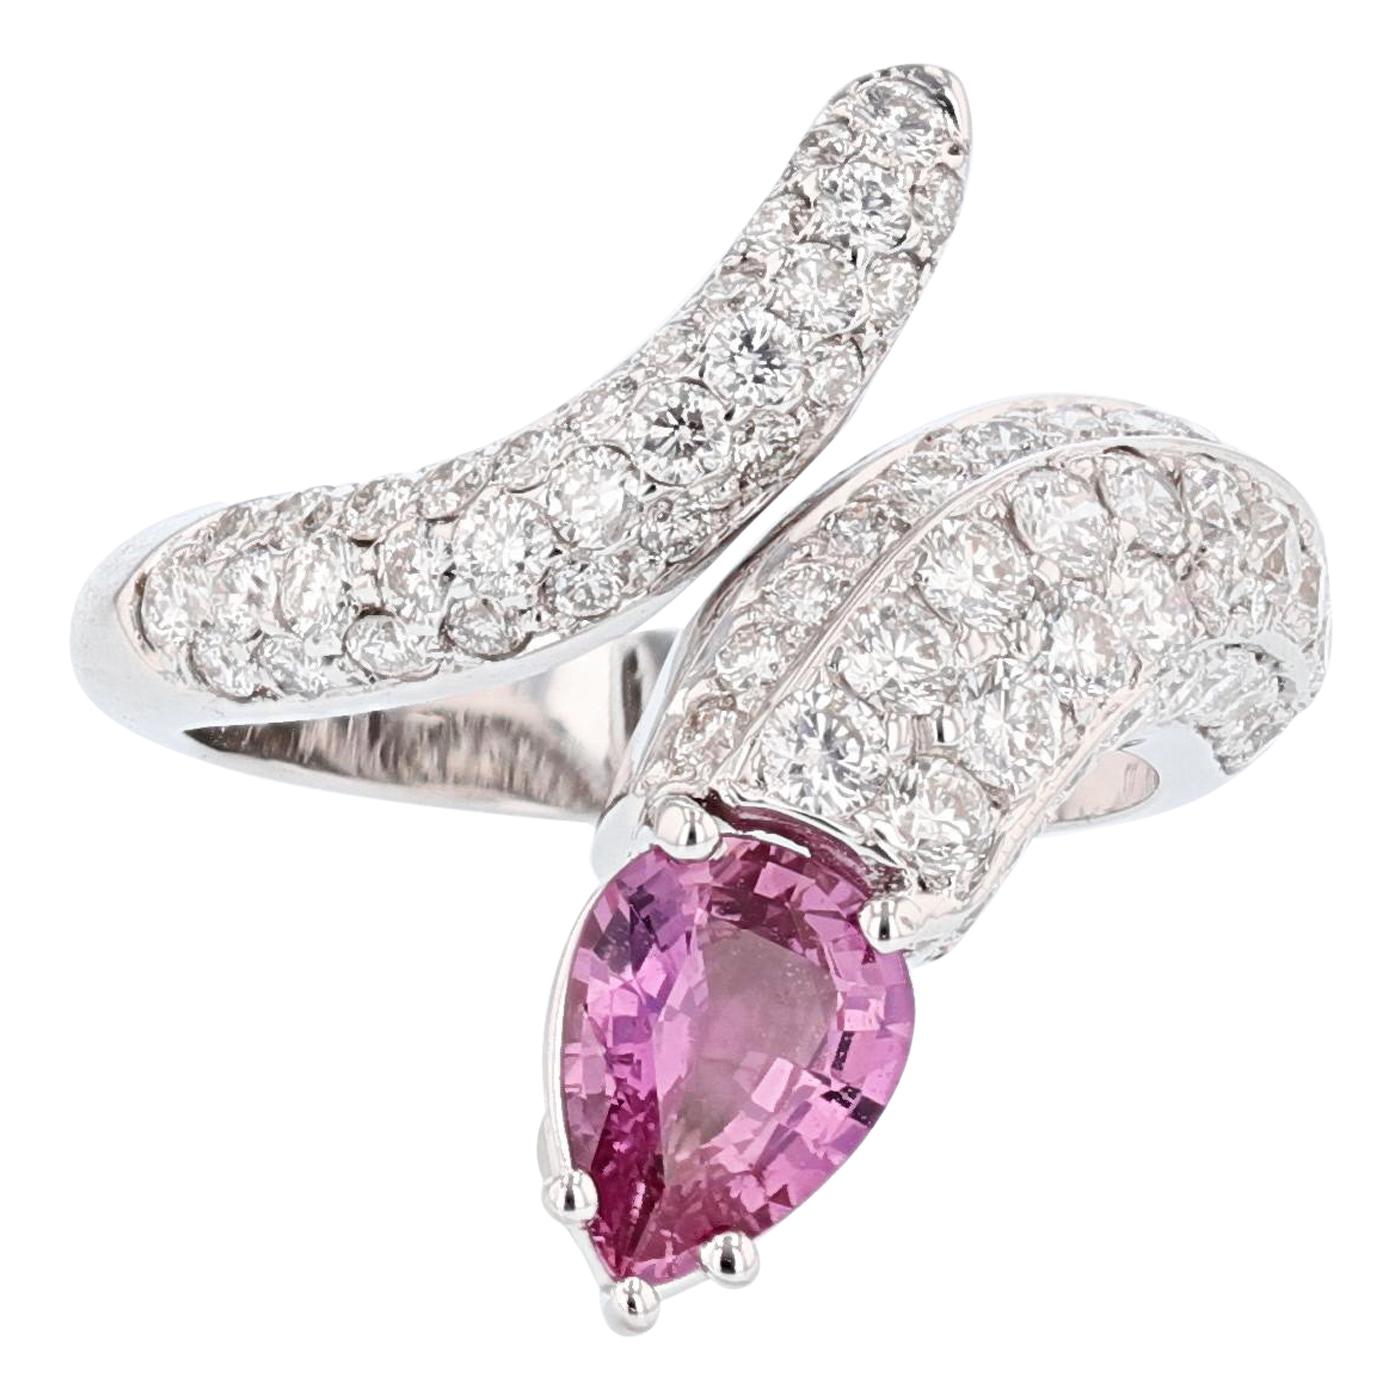 14 Karat White Gold 1.25 Carat Pear Shape Pink Sapphire and Diamond Snake Ring For Sale